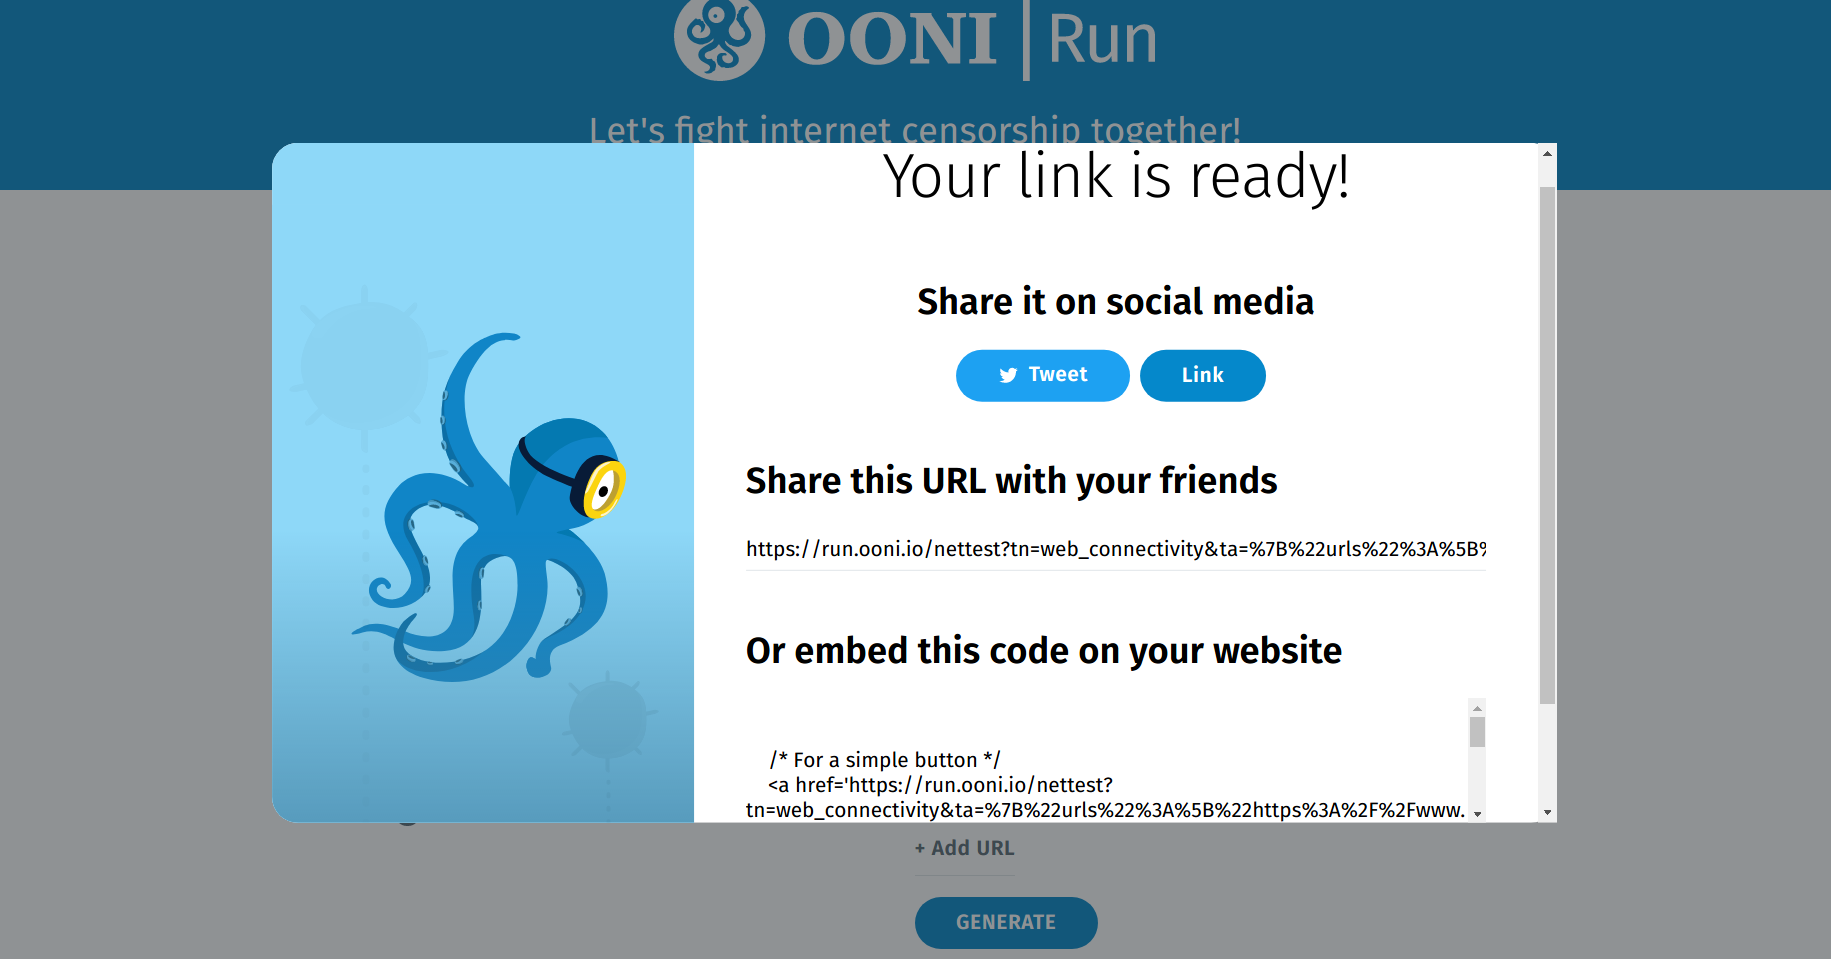 OONI Run: Links and code